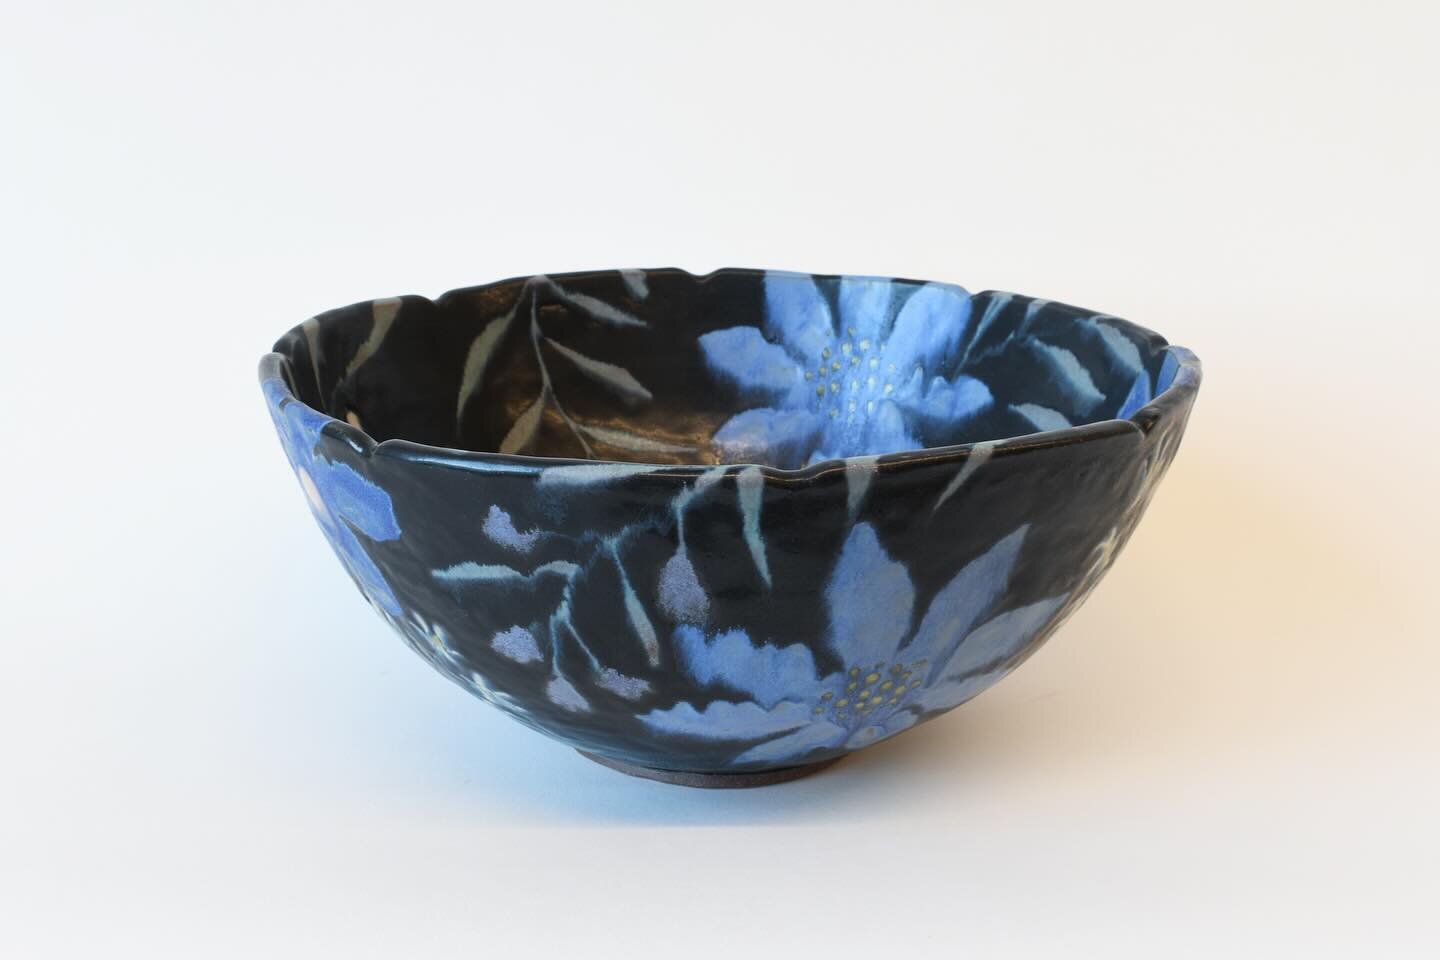 This large hand built bowl is part of The Clay Studio show at NCECA, Richmond, VA. More info below 👇 

Join us during NCECA in Richmond, Virginia for 50 Years in the Making at Common House

Opening reception: Thursday, March 21st 7-9pm  Gallery hour